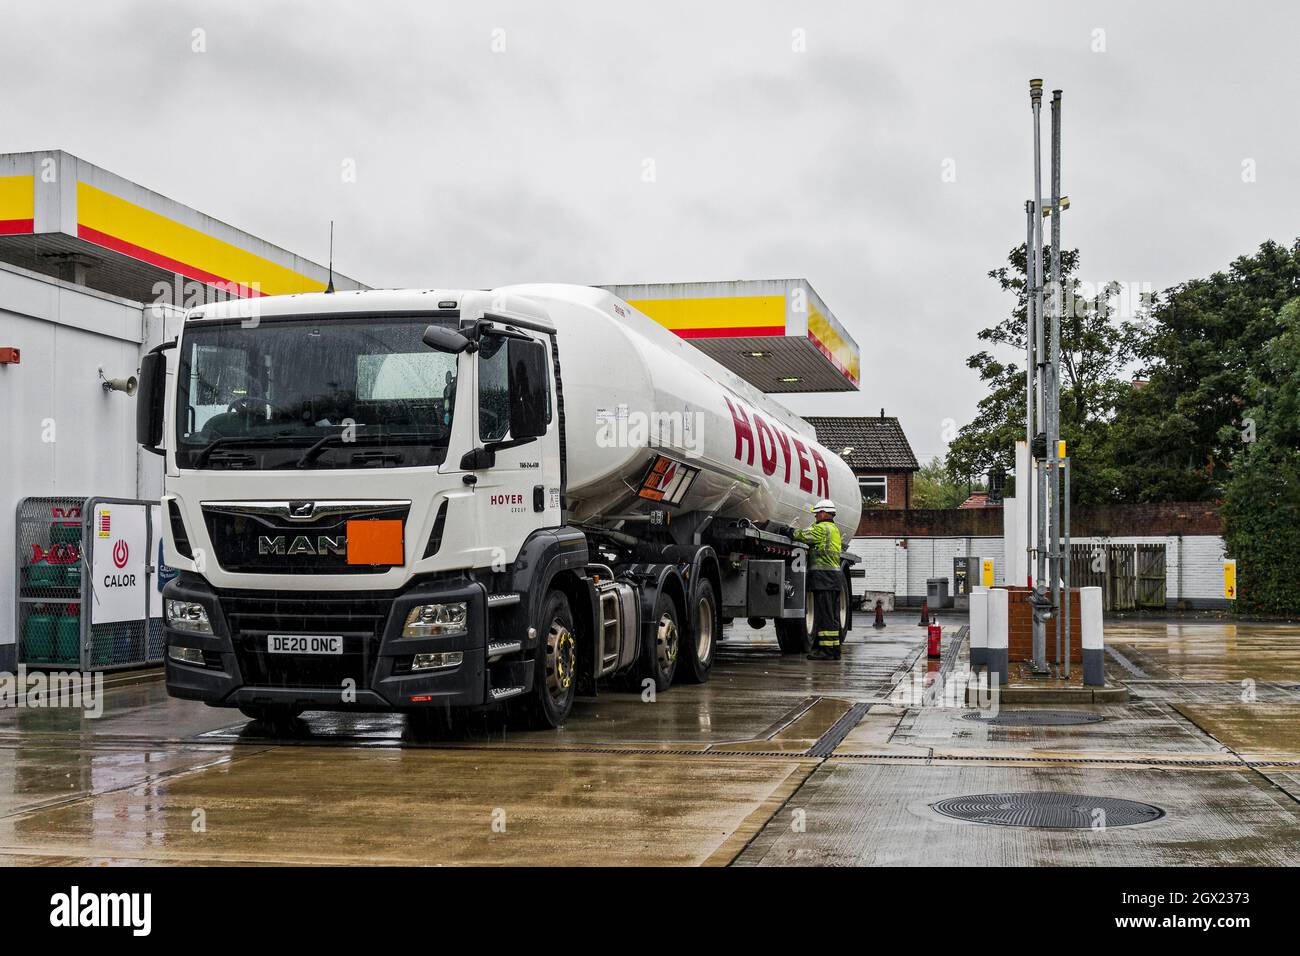 A fuel tanker at a UK petrol station Stock Photo